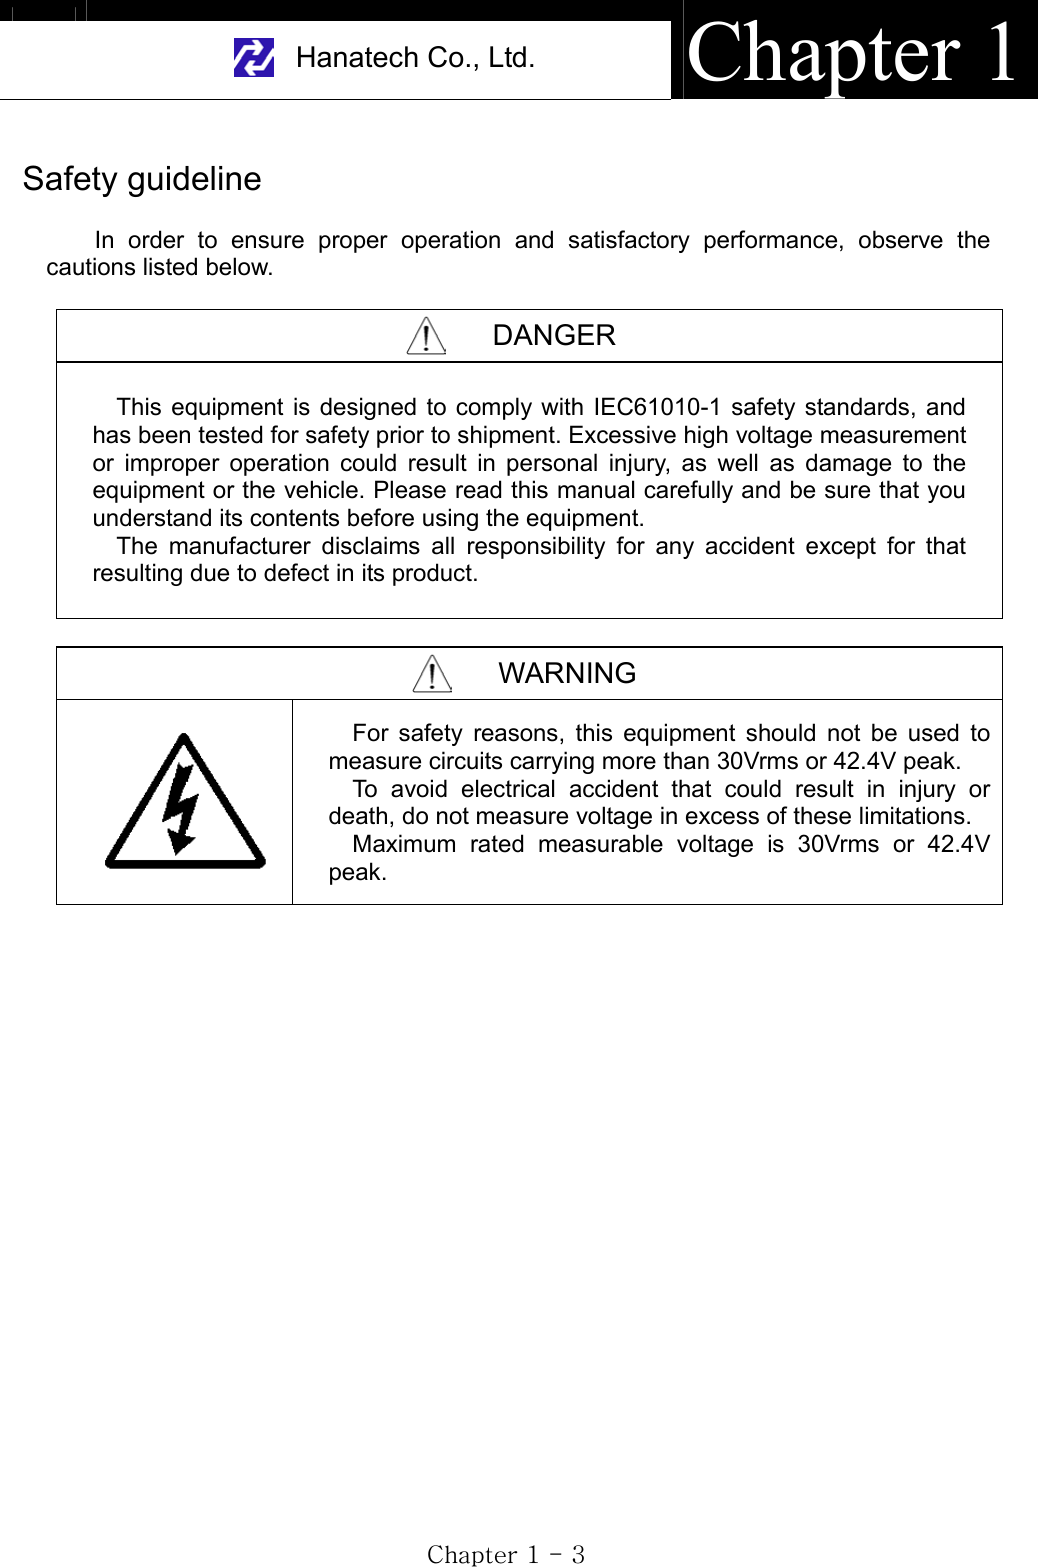 Hanatech Co., Ltd.  Chapter 1GjGXGTGZGSafety guideline In order to ensure proper operation and satisfactory performance, observe the cautions listed below. DANGER This equipment is designed to comply with IEC61010-1 safety standards, and has been tested for safety prior to shipment. Excessive high voltage measurement or improper operation could result in personal injury, as well as damage to the equipment or the vehicle. Please read this manual carefully and be sure that you understand its contents before using the equipment.                 The manufacturer disclaims all responsibility for any accident except for that resulting due to defect in its product. WARNING For safety reasons, this equipment should not be used to measure circuits carrying more than 30Vrms or 42.4V peak. To avoid electrical accident that could result in injury or death, do not measure voltage in excess of these limitations. Maximum rated measurable voltage is 30Vrms or 42.4V peak.  